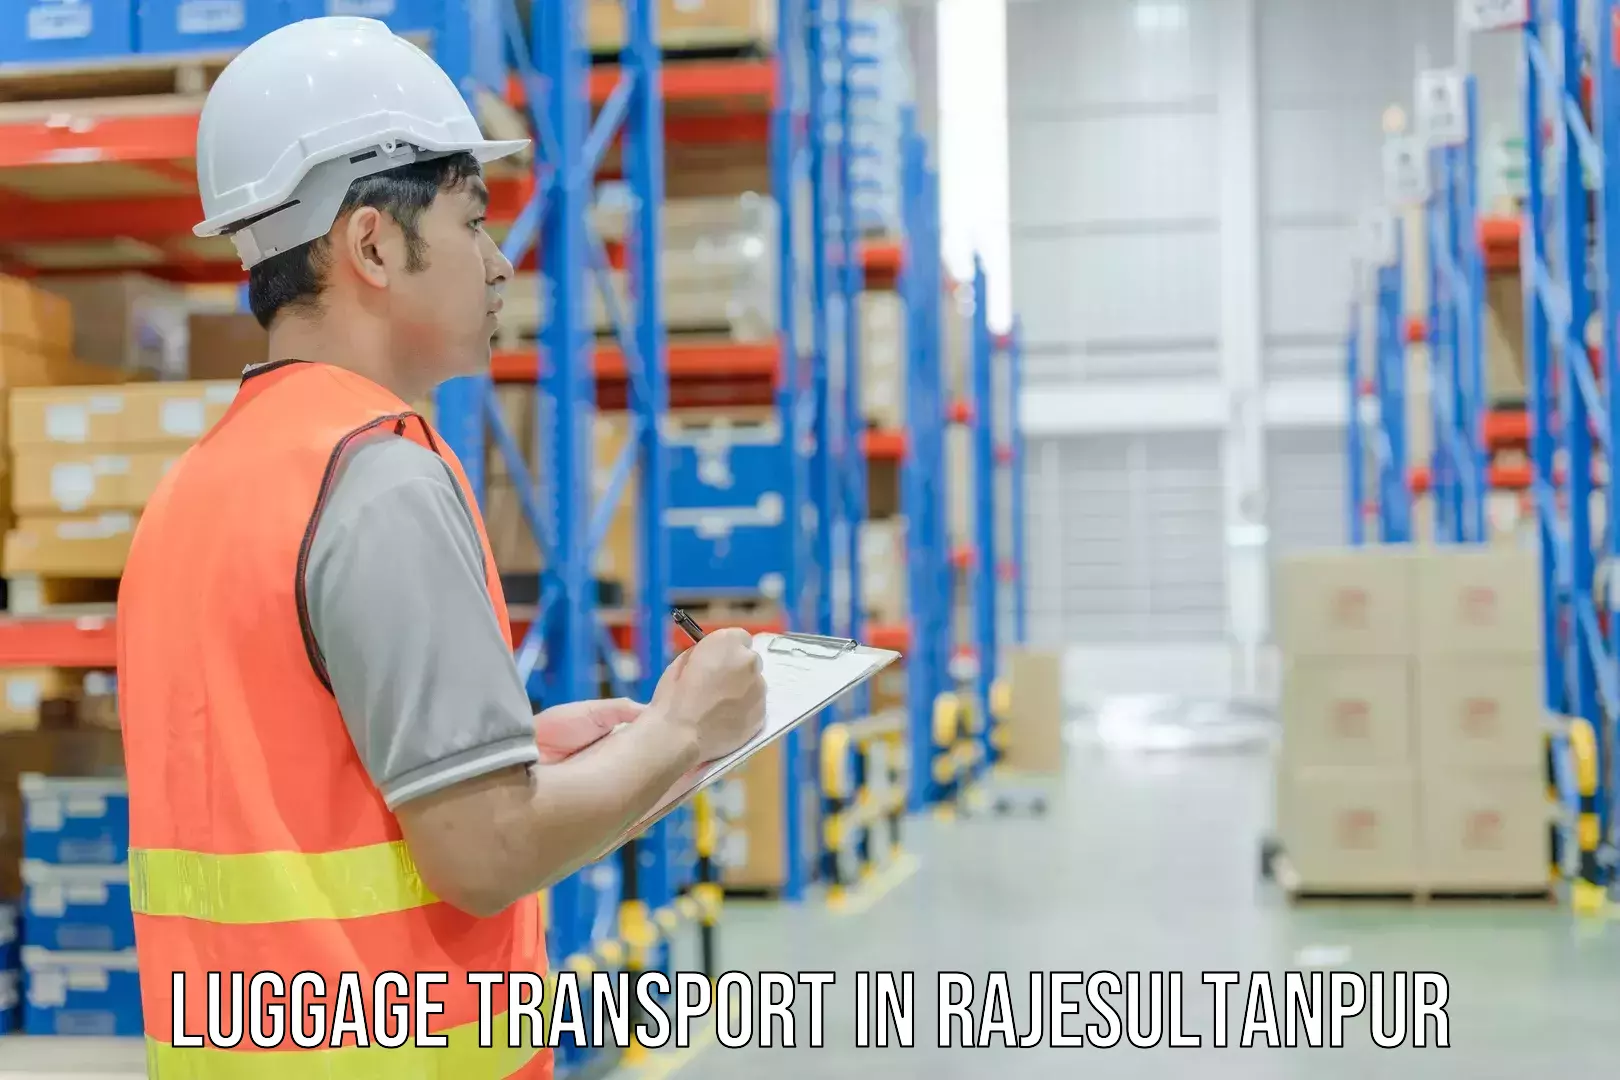 Luggage shipment strategy in Rajesultanpur